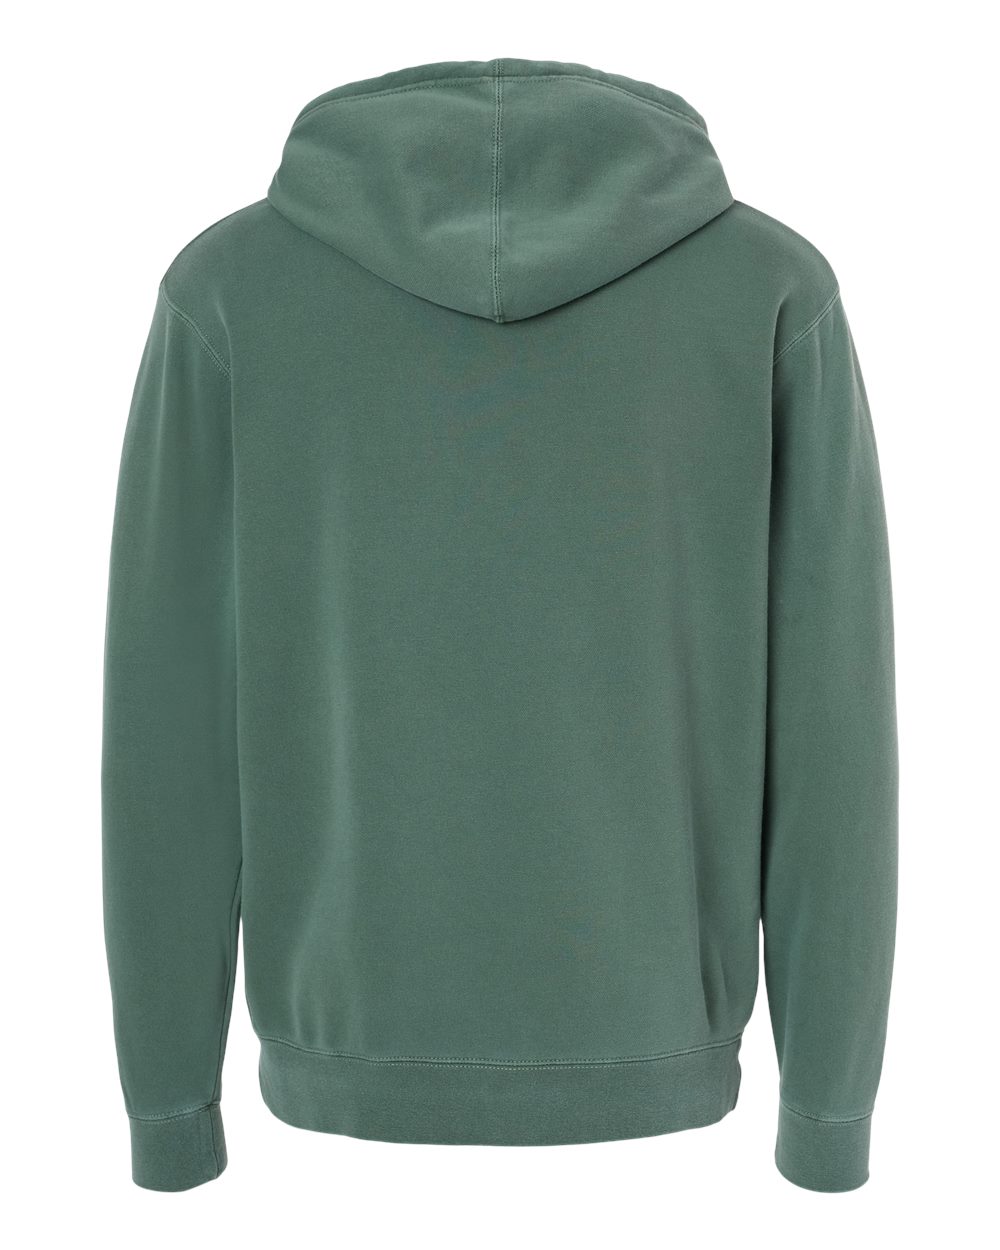 Independent Trading Co. PRM4500 Midweight Pigment Dyed Hooded Sweatshirt